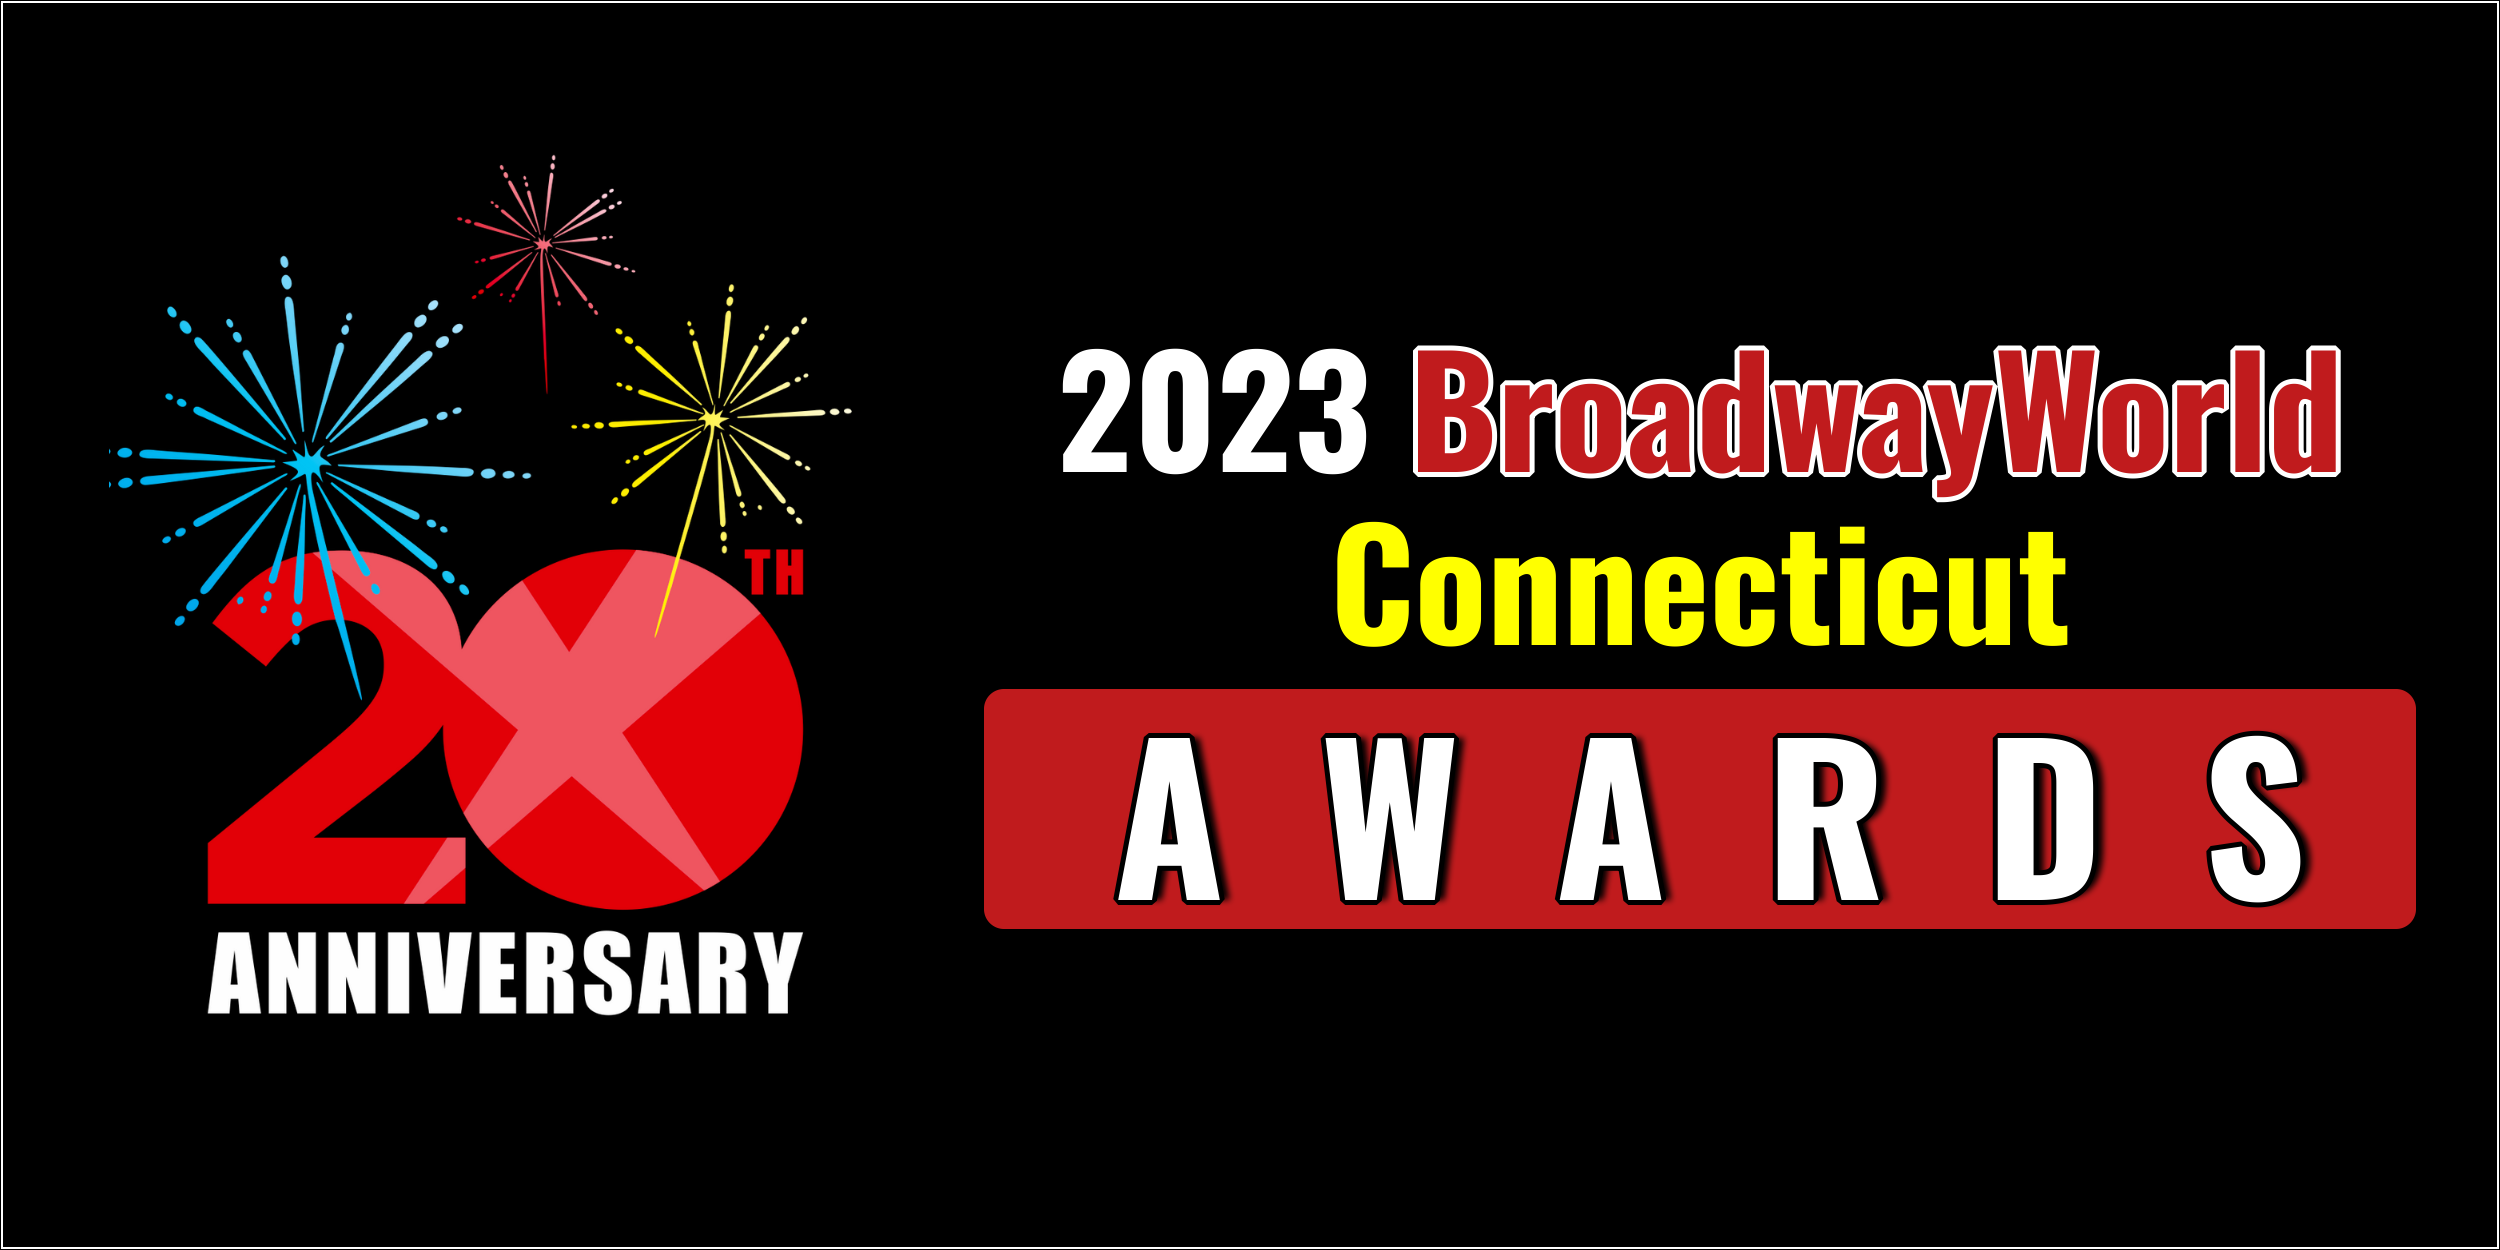 Latest Standings Announced For The 2023 BroadwayWorld Connecticut Awards;  Leads Favorite Local Theatre! 